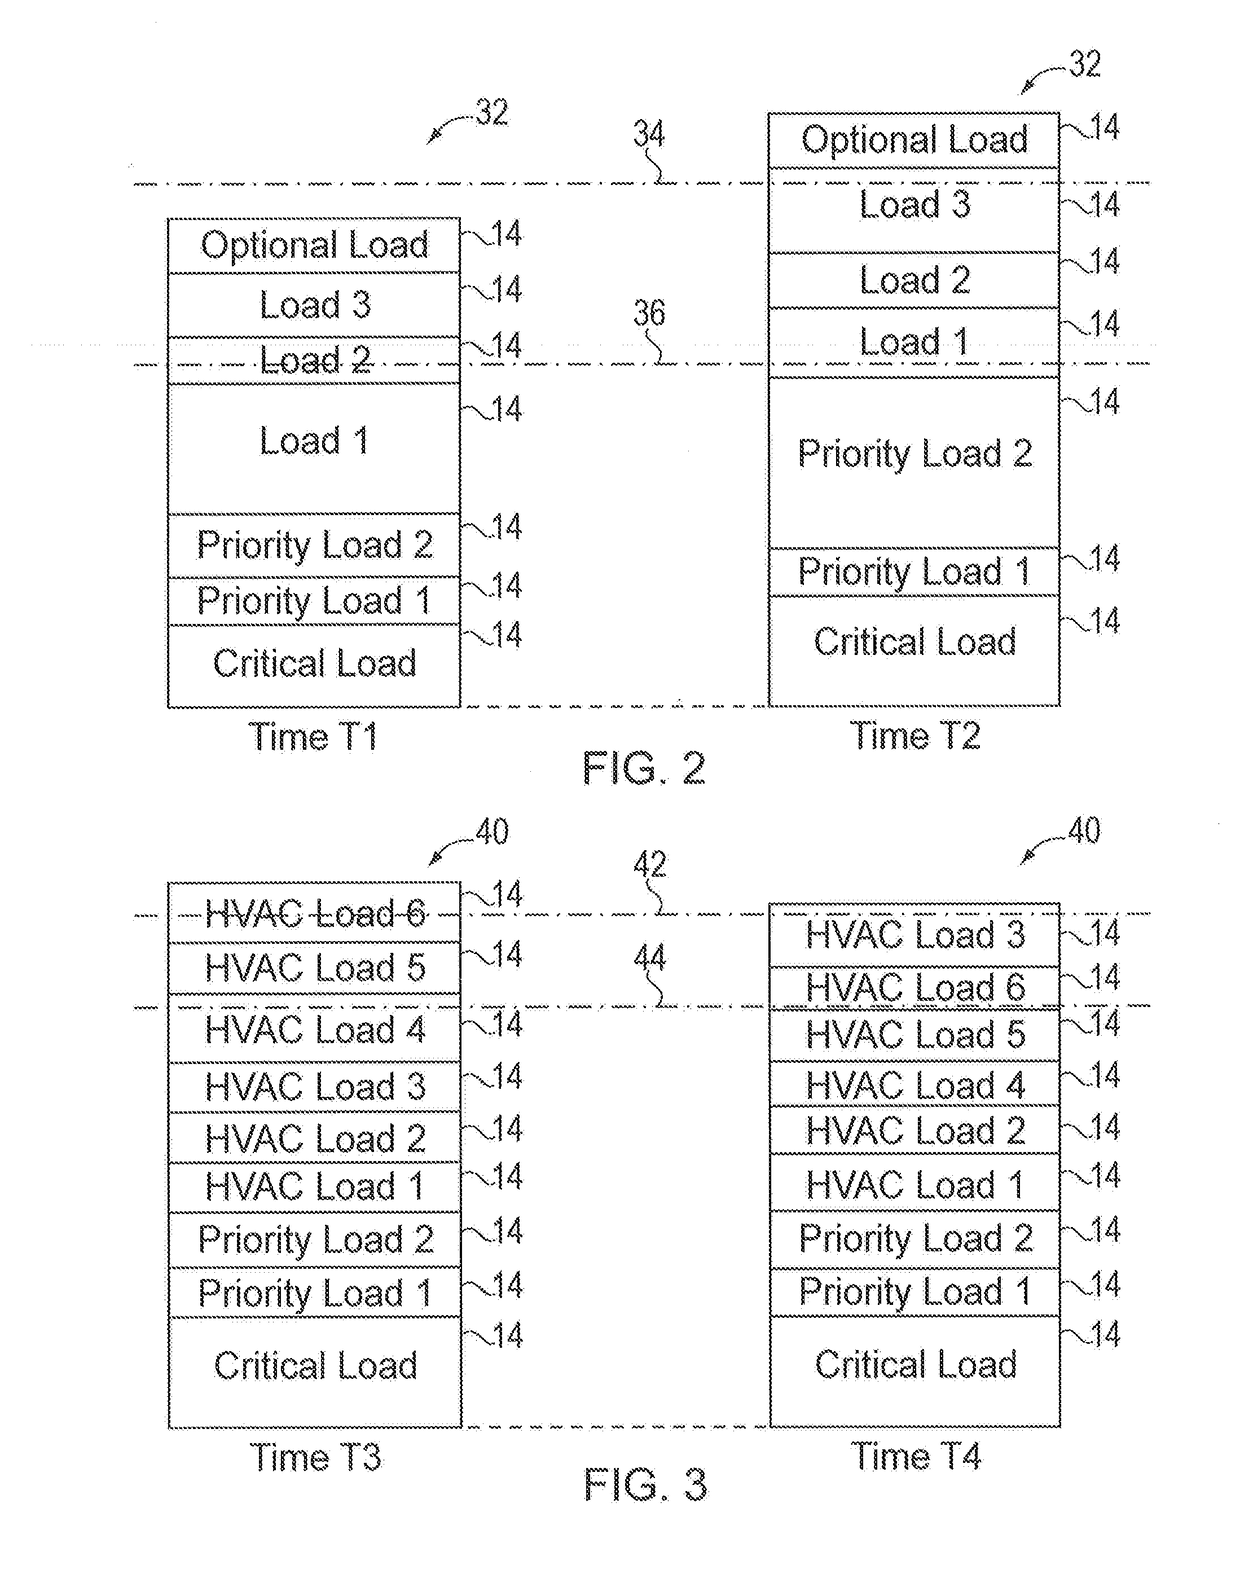 Systems and methods for performing building energy management